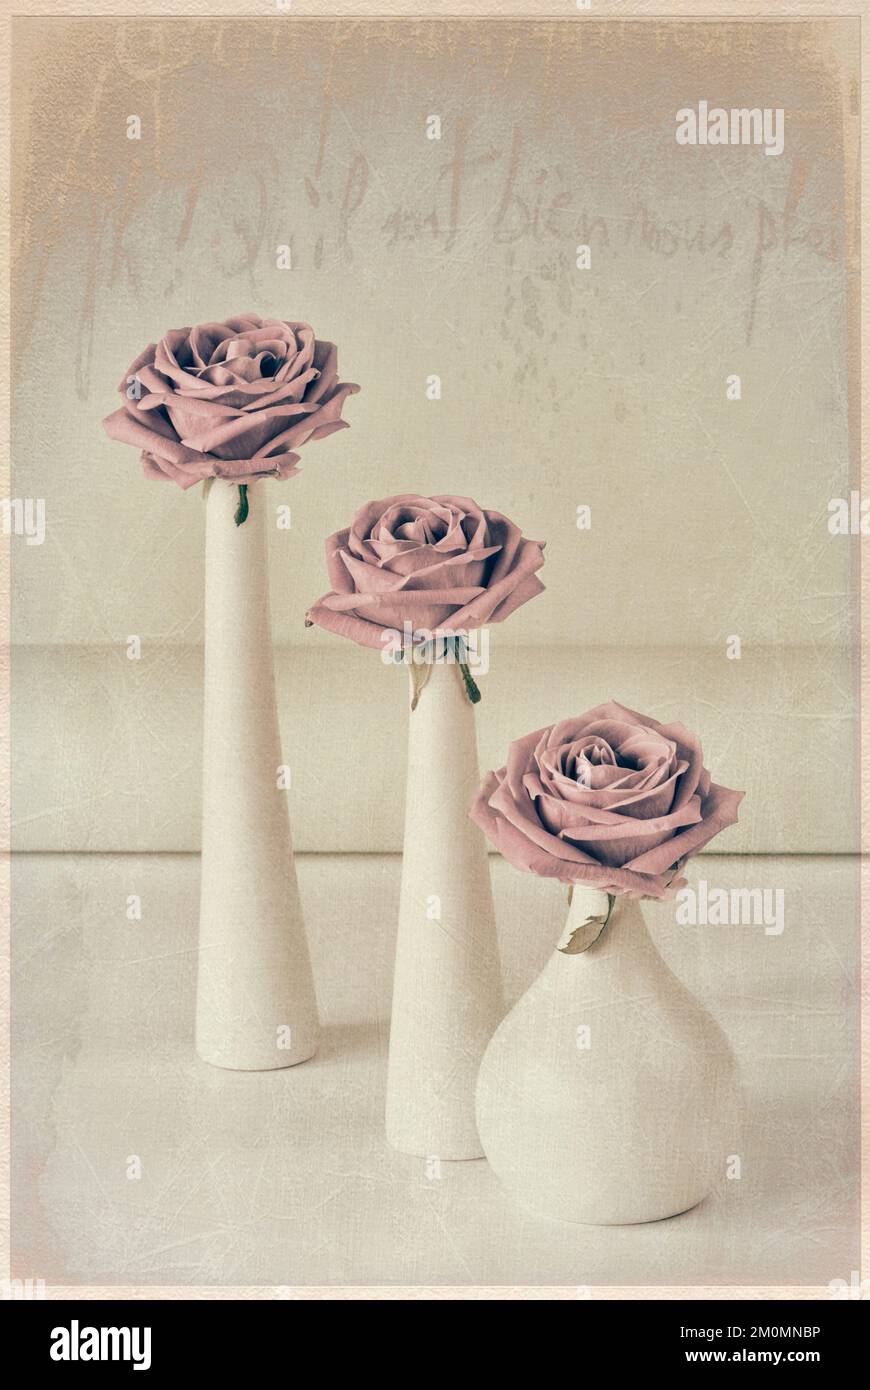 Three pale pink roses in three white vases with texture overlay Stock Photo